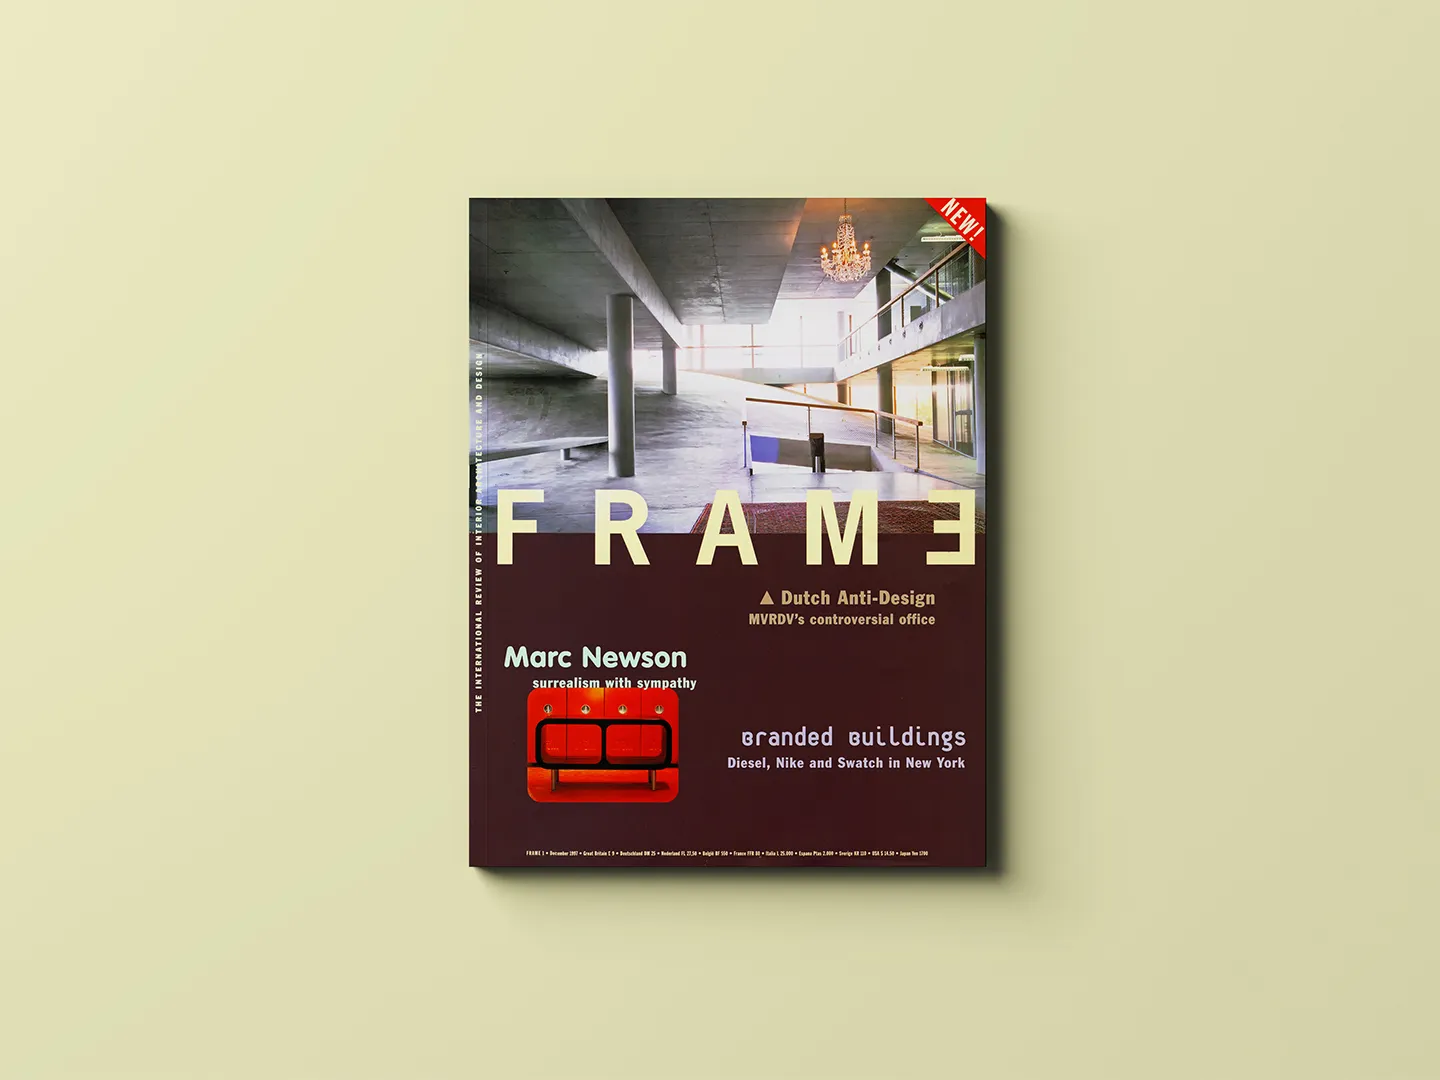 frame magazine, first number, salone milano